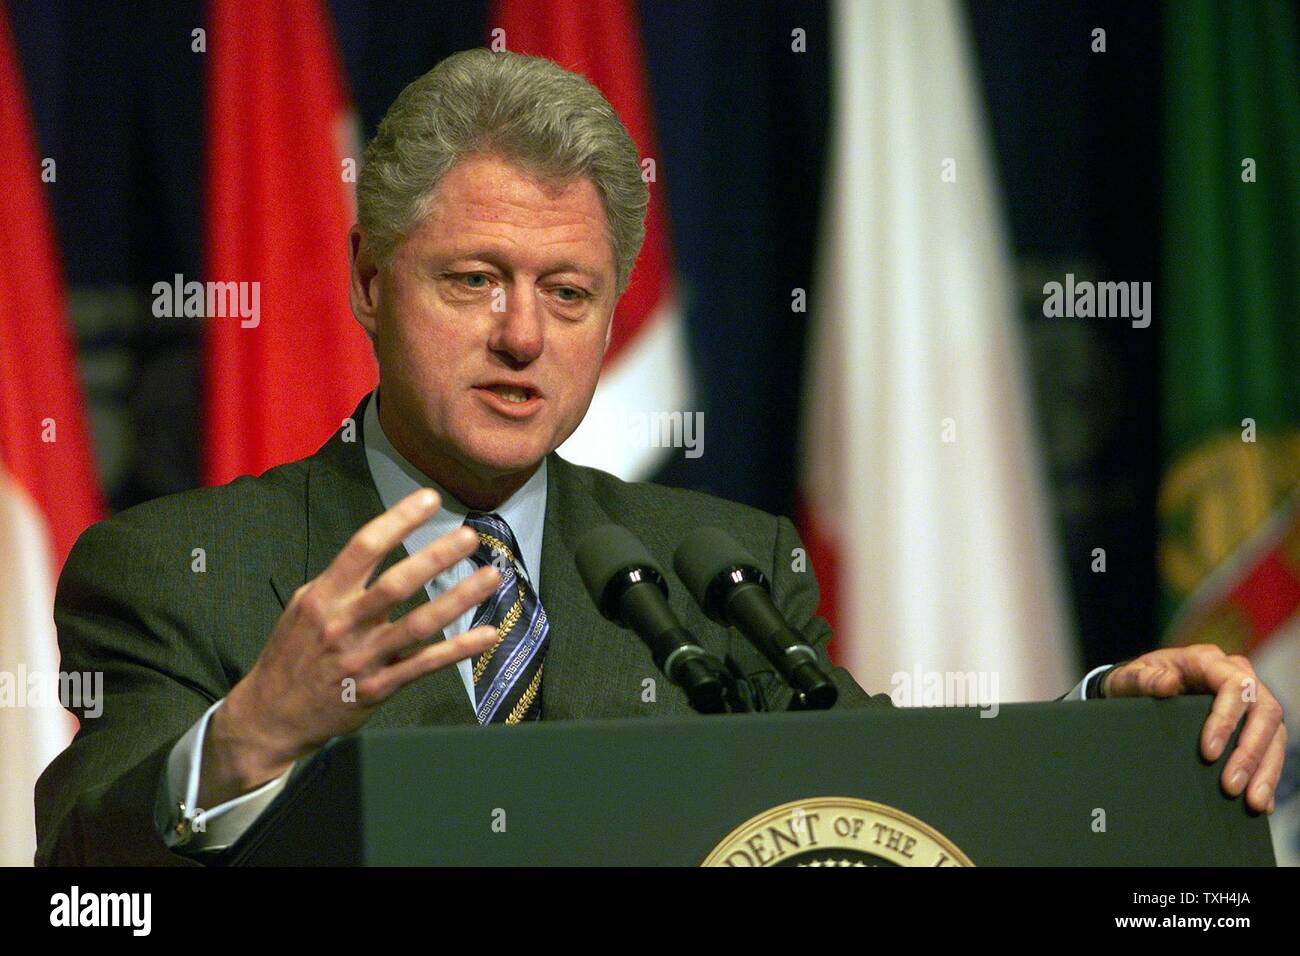 William Jefferson 'Bill' Clinton, 42nd President of the United States of America (1993-2001), giving a press conference in the Amphitheater of the ITC Reagan Building Stock Photo